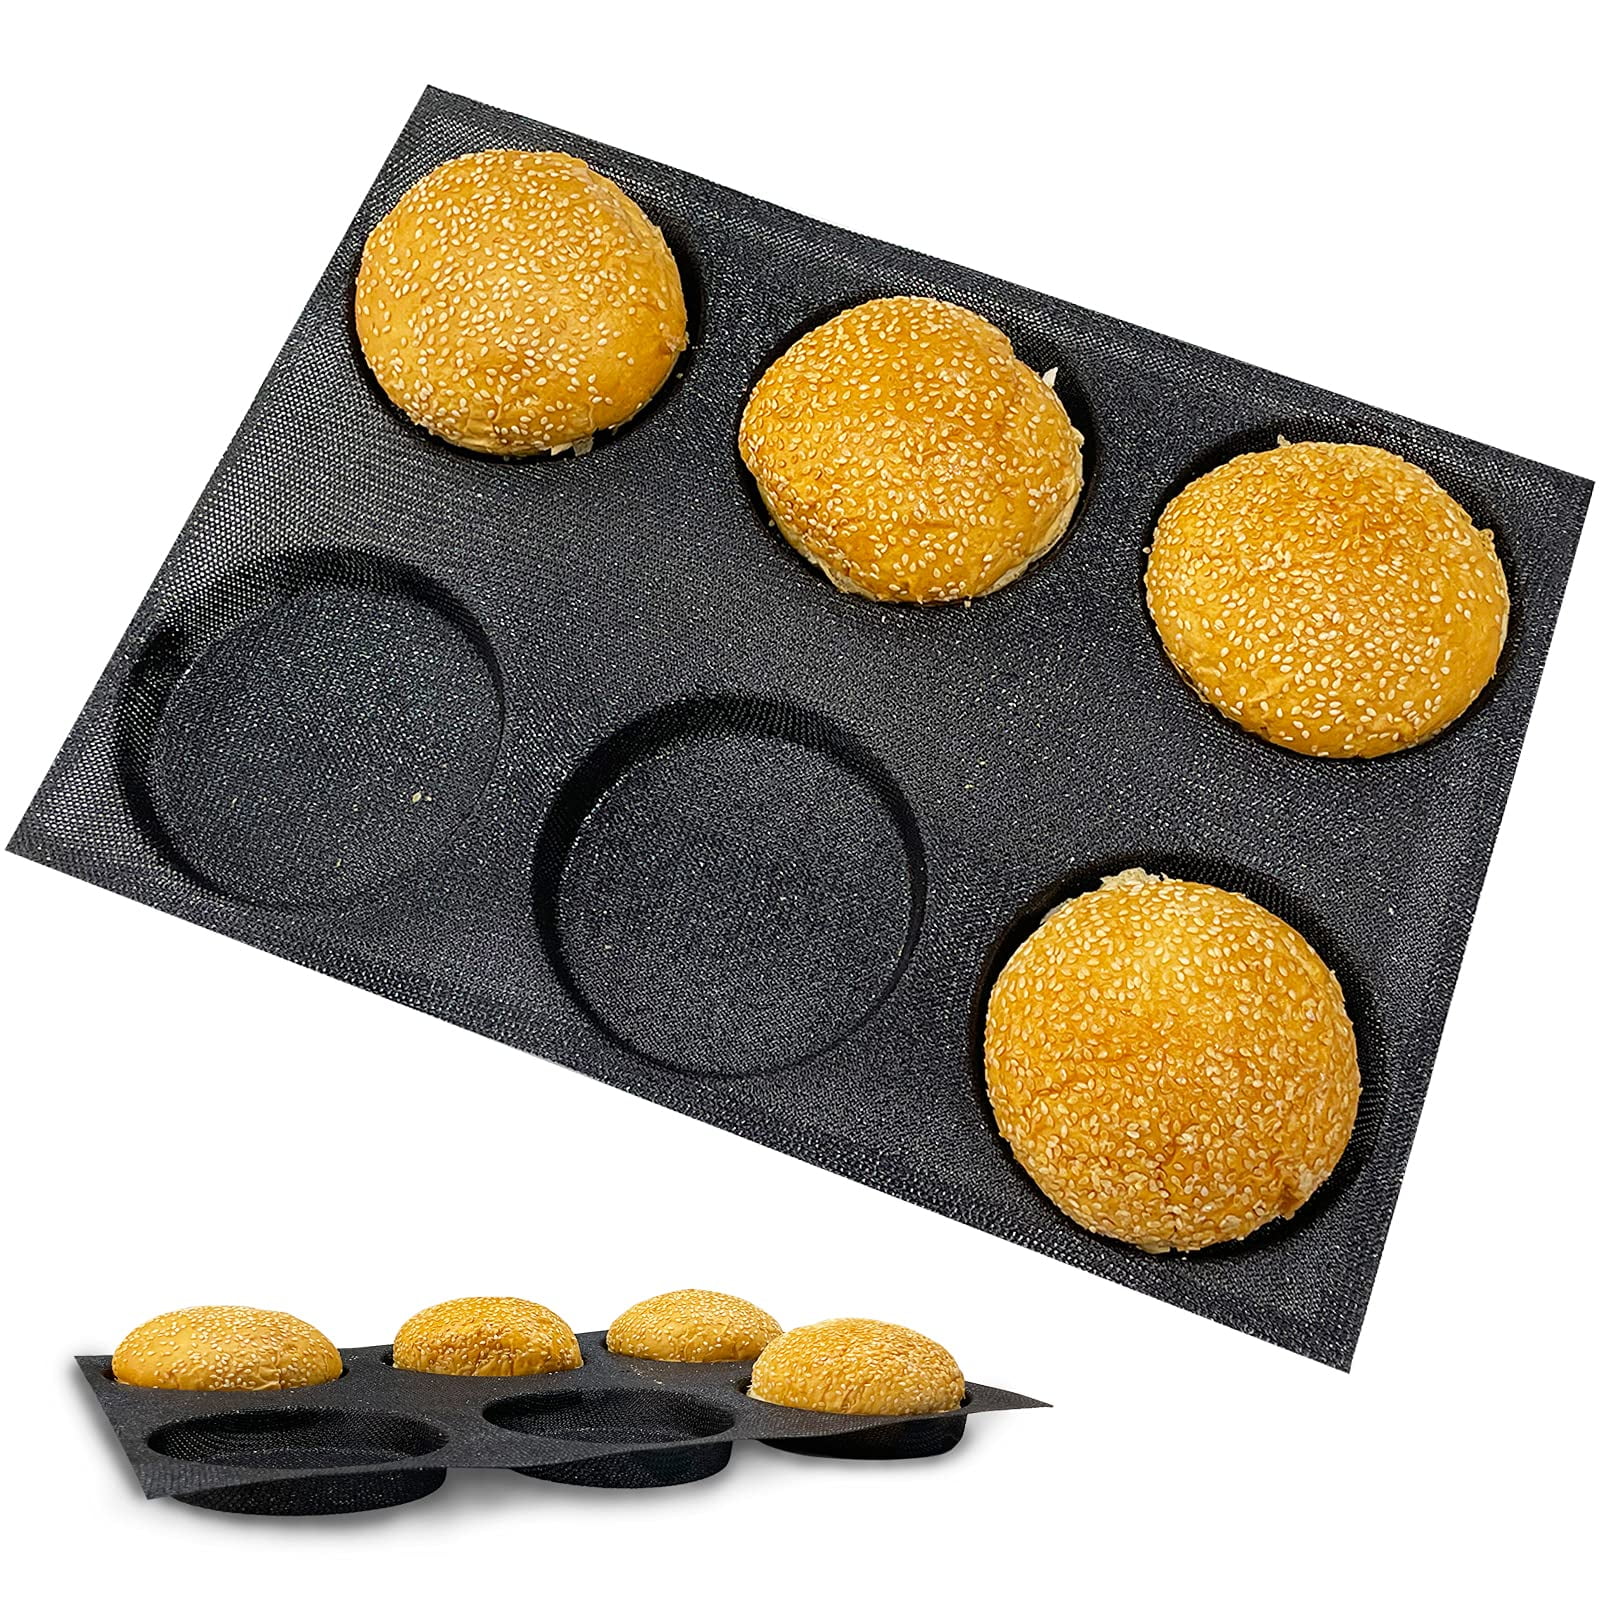 5 Hamburger Bun Tray with 15 Moulds ⋆ American Pan IE